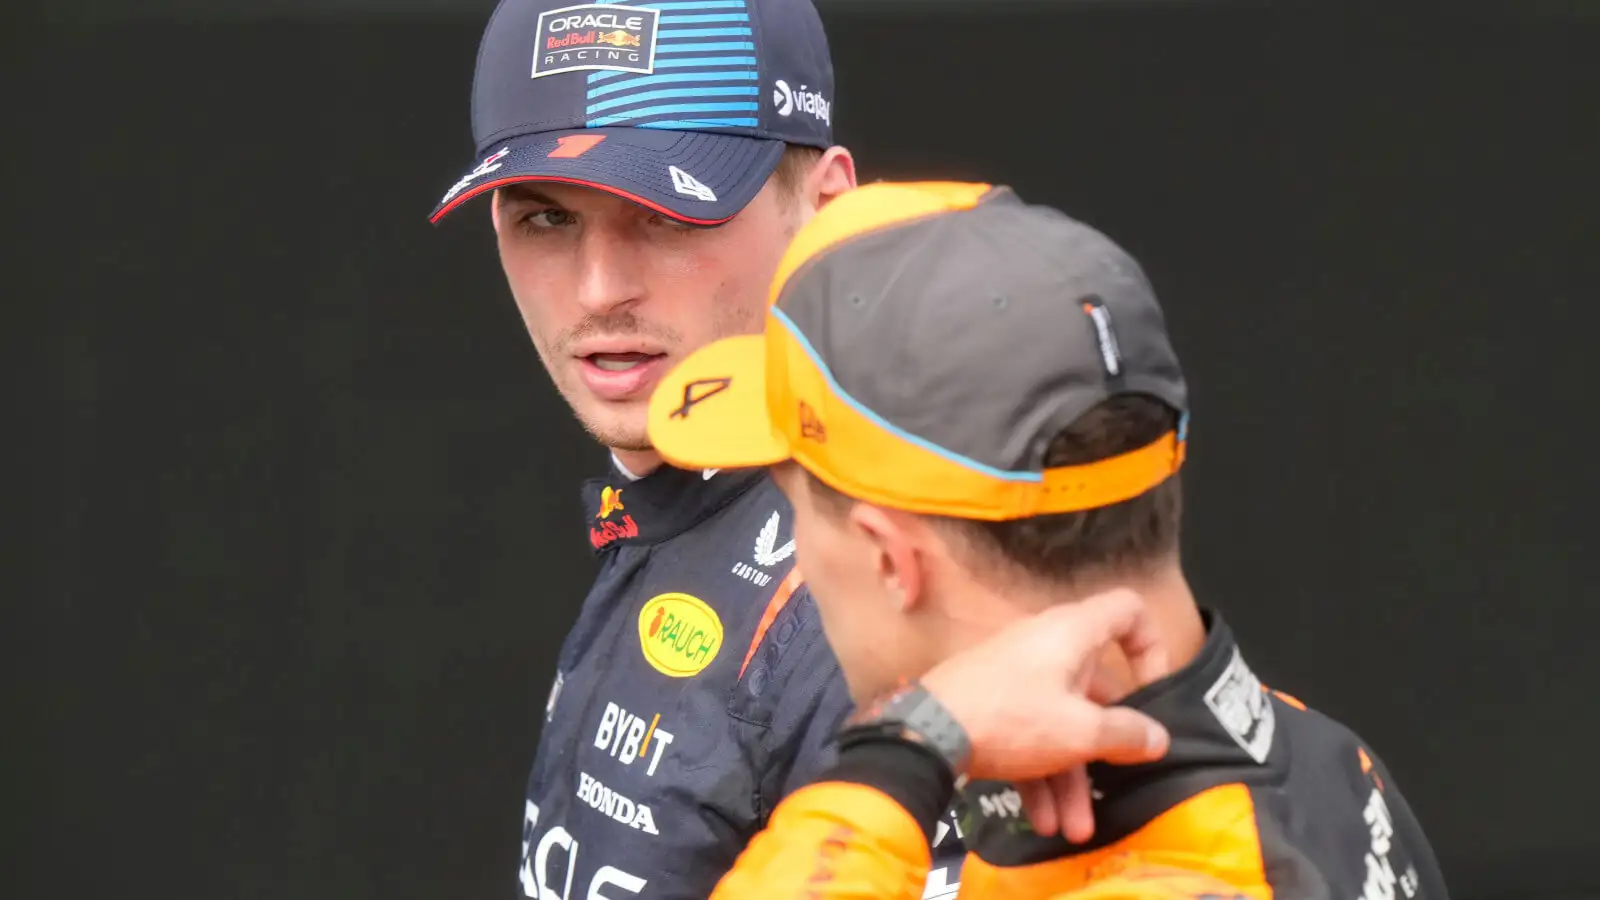 Helmut Marko hints at 'not helpful' Lando Norris messages as 'factor' in Imola win